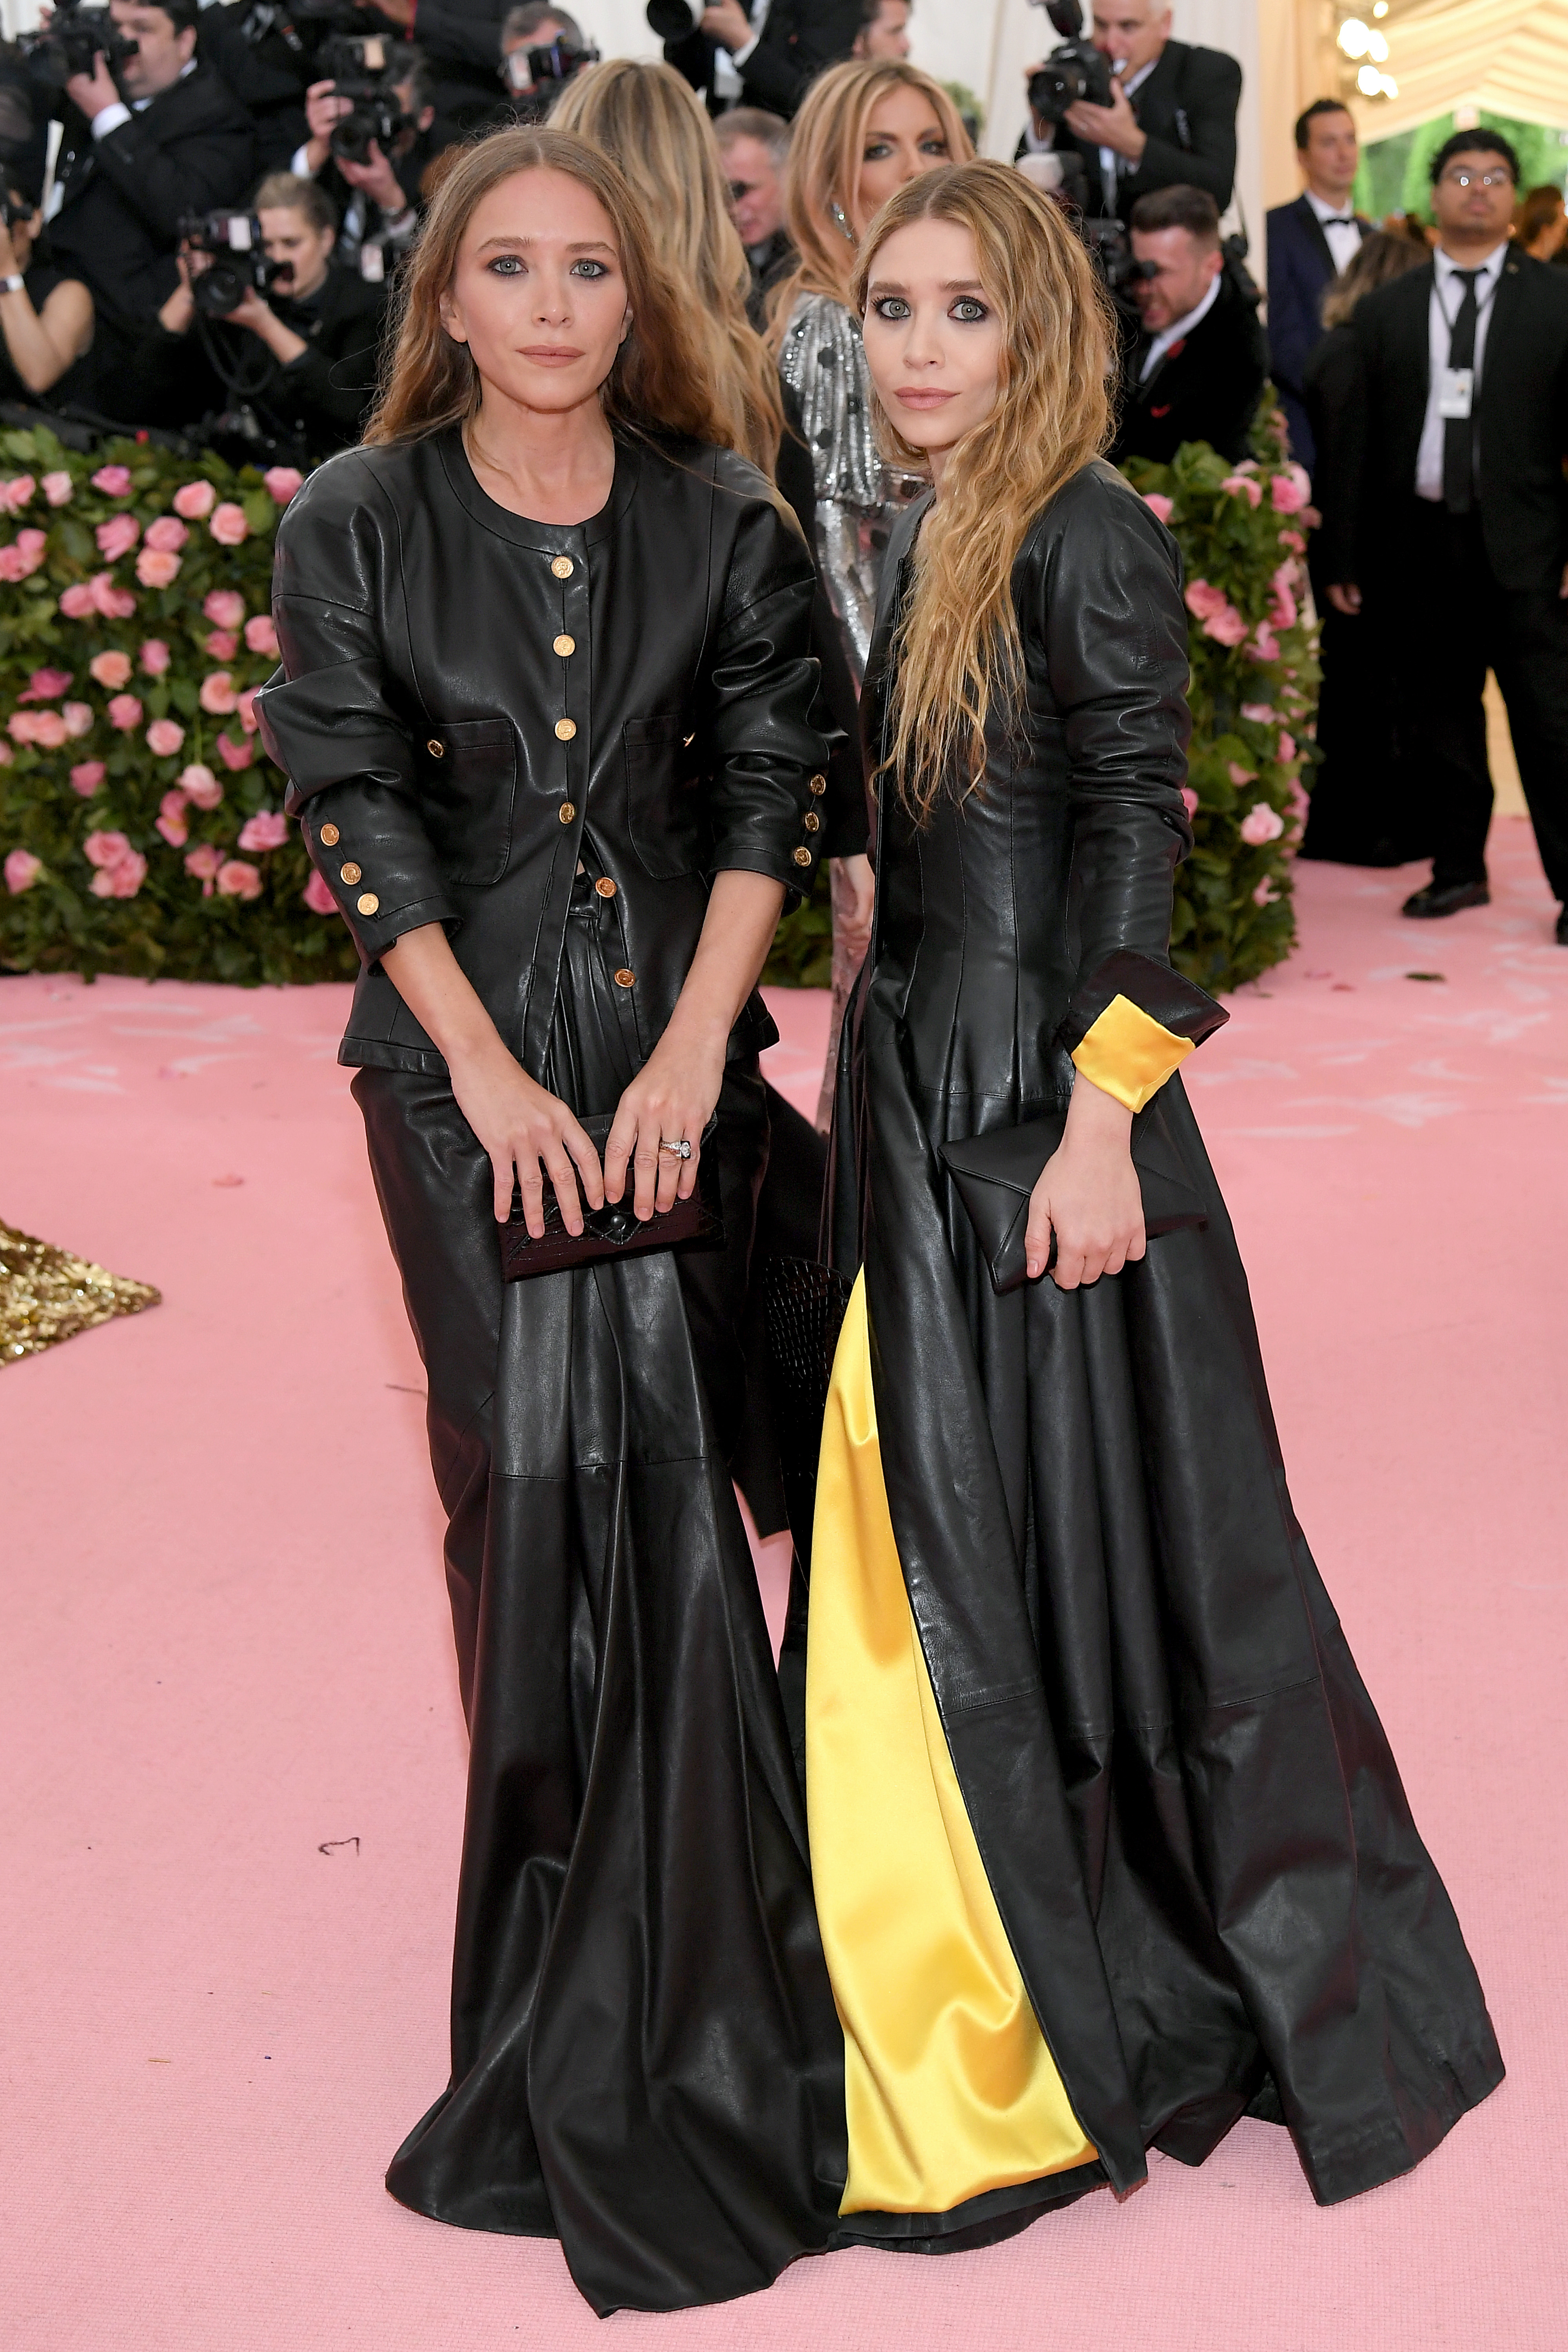 Two individuals standing together in matching leather outfits with a yellow accent on one sleeve at a formal event